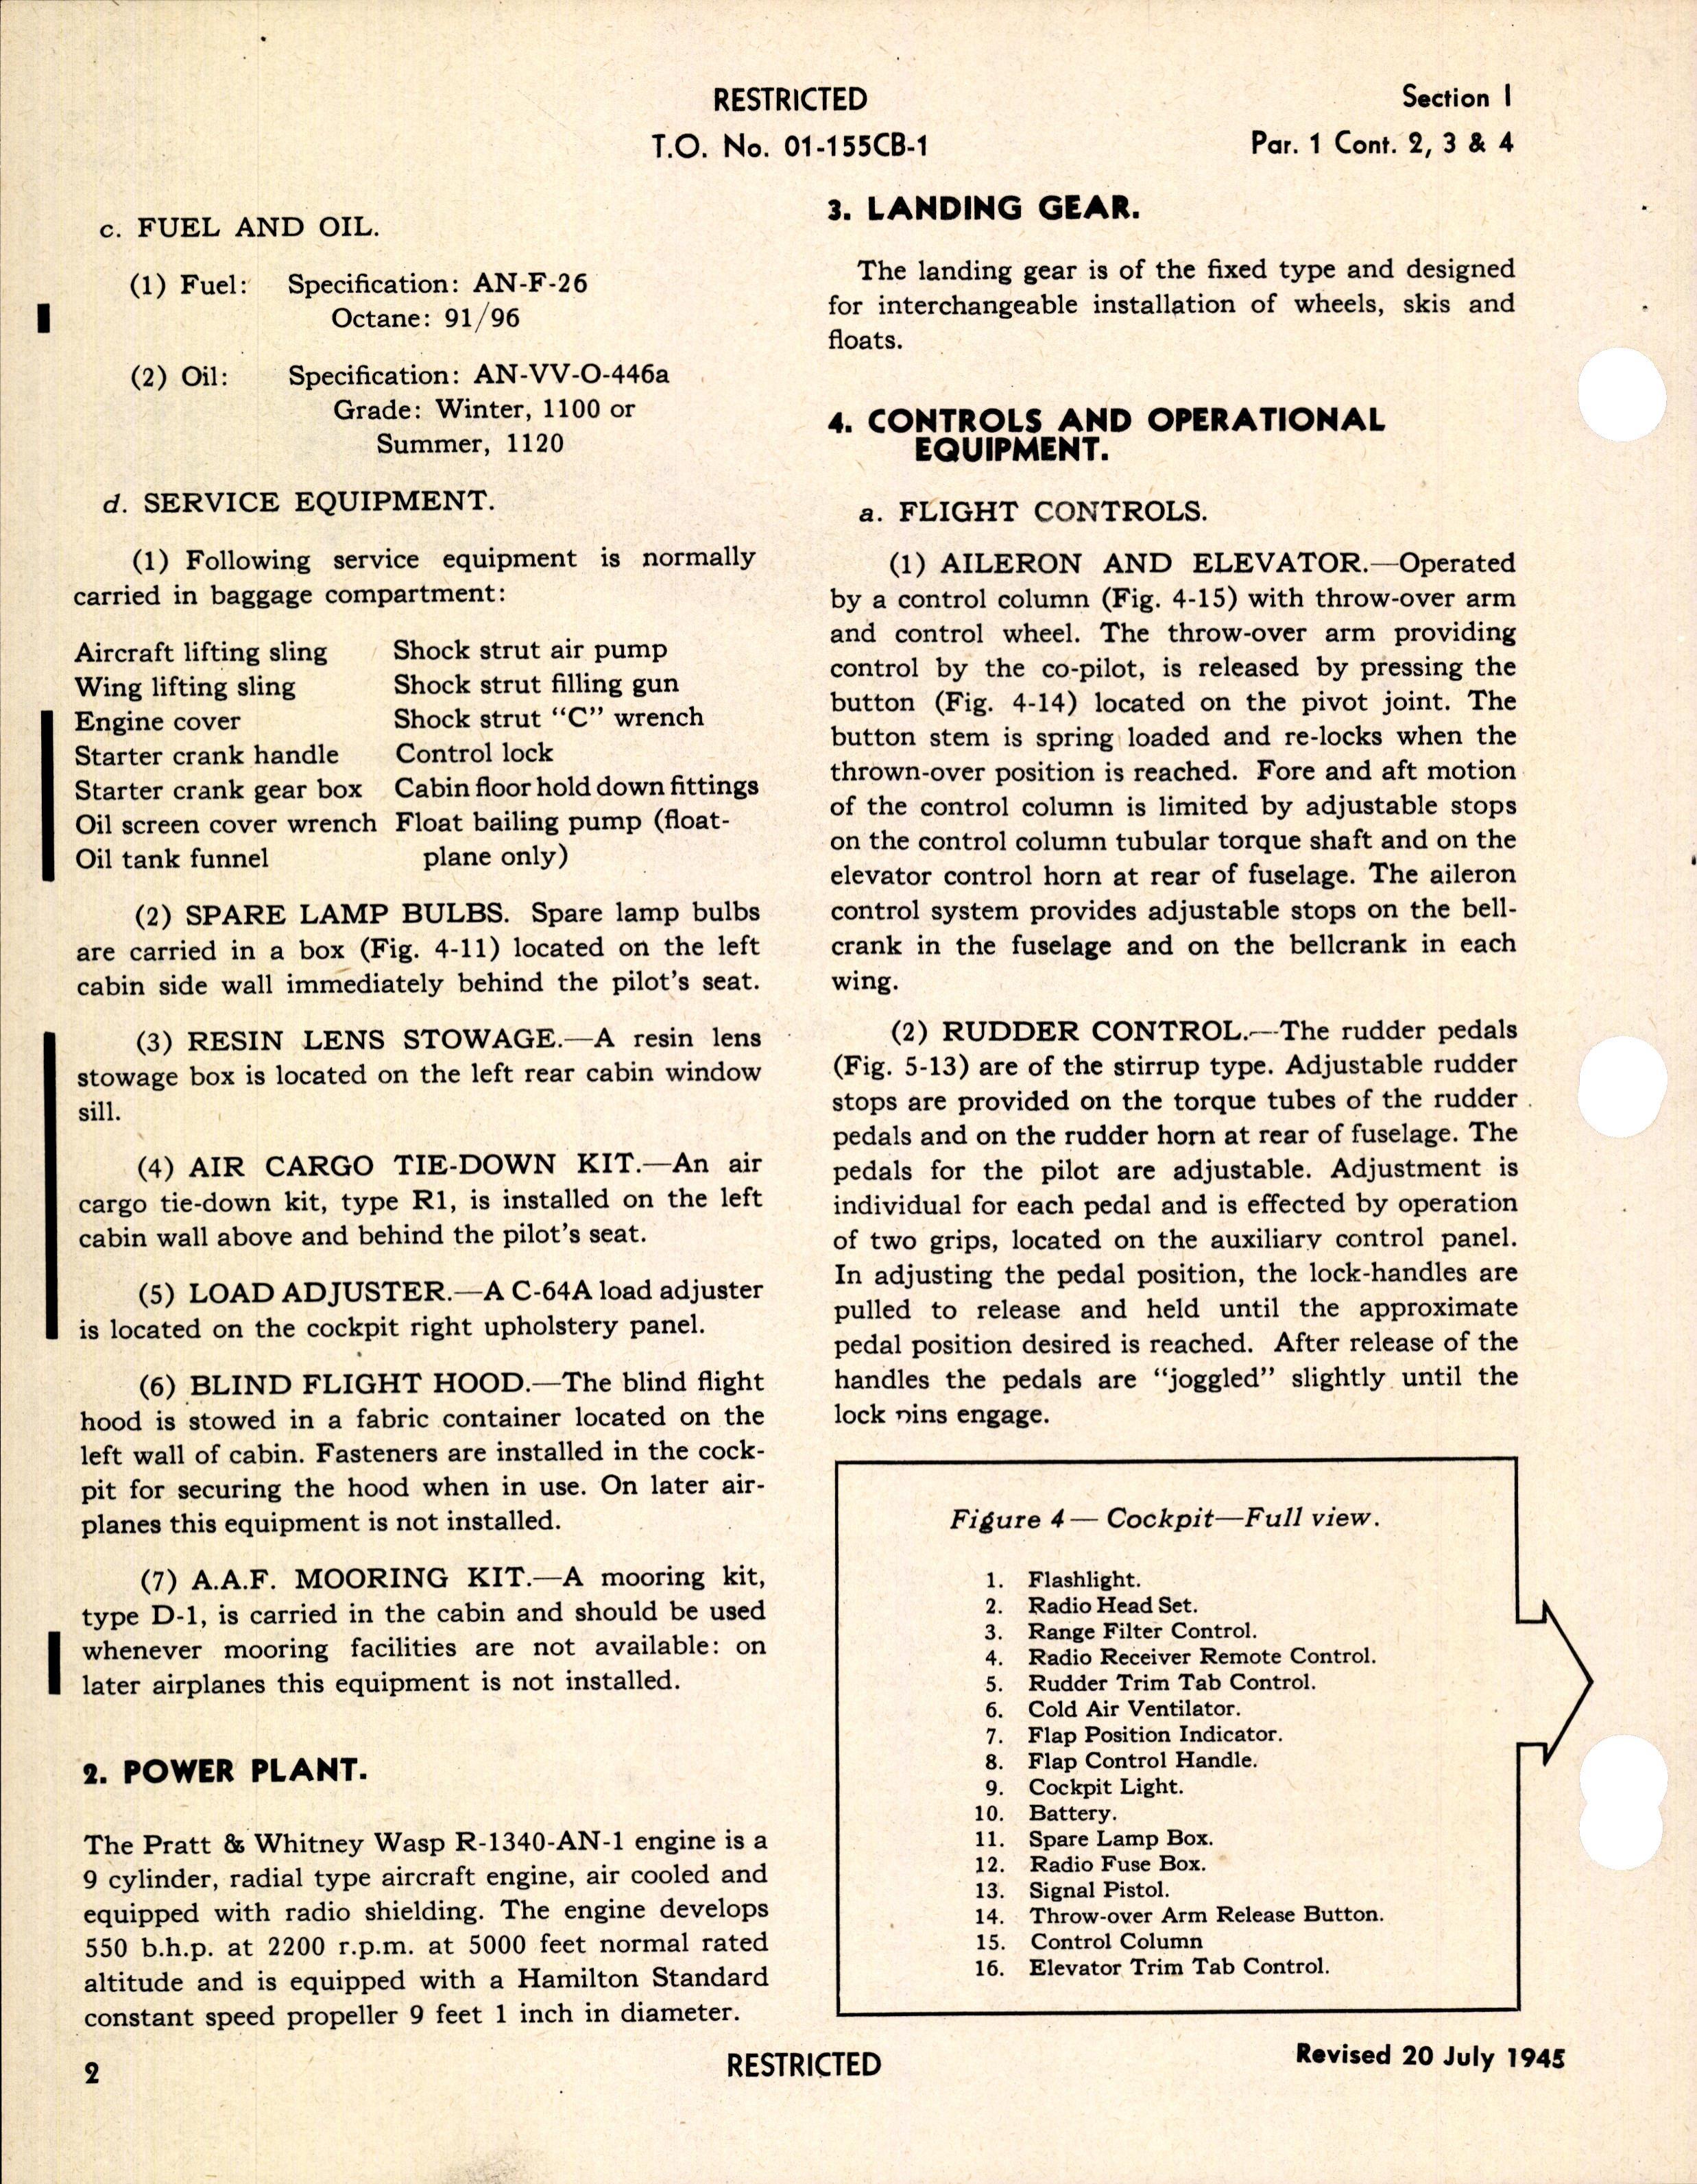 Sample page 6 from AirCorps Library document: Pilot's Flight Operating Instructions for Army Model C-64A